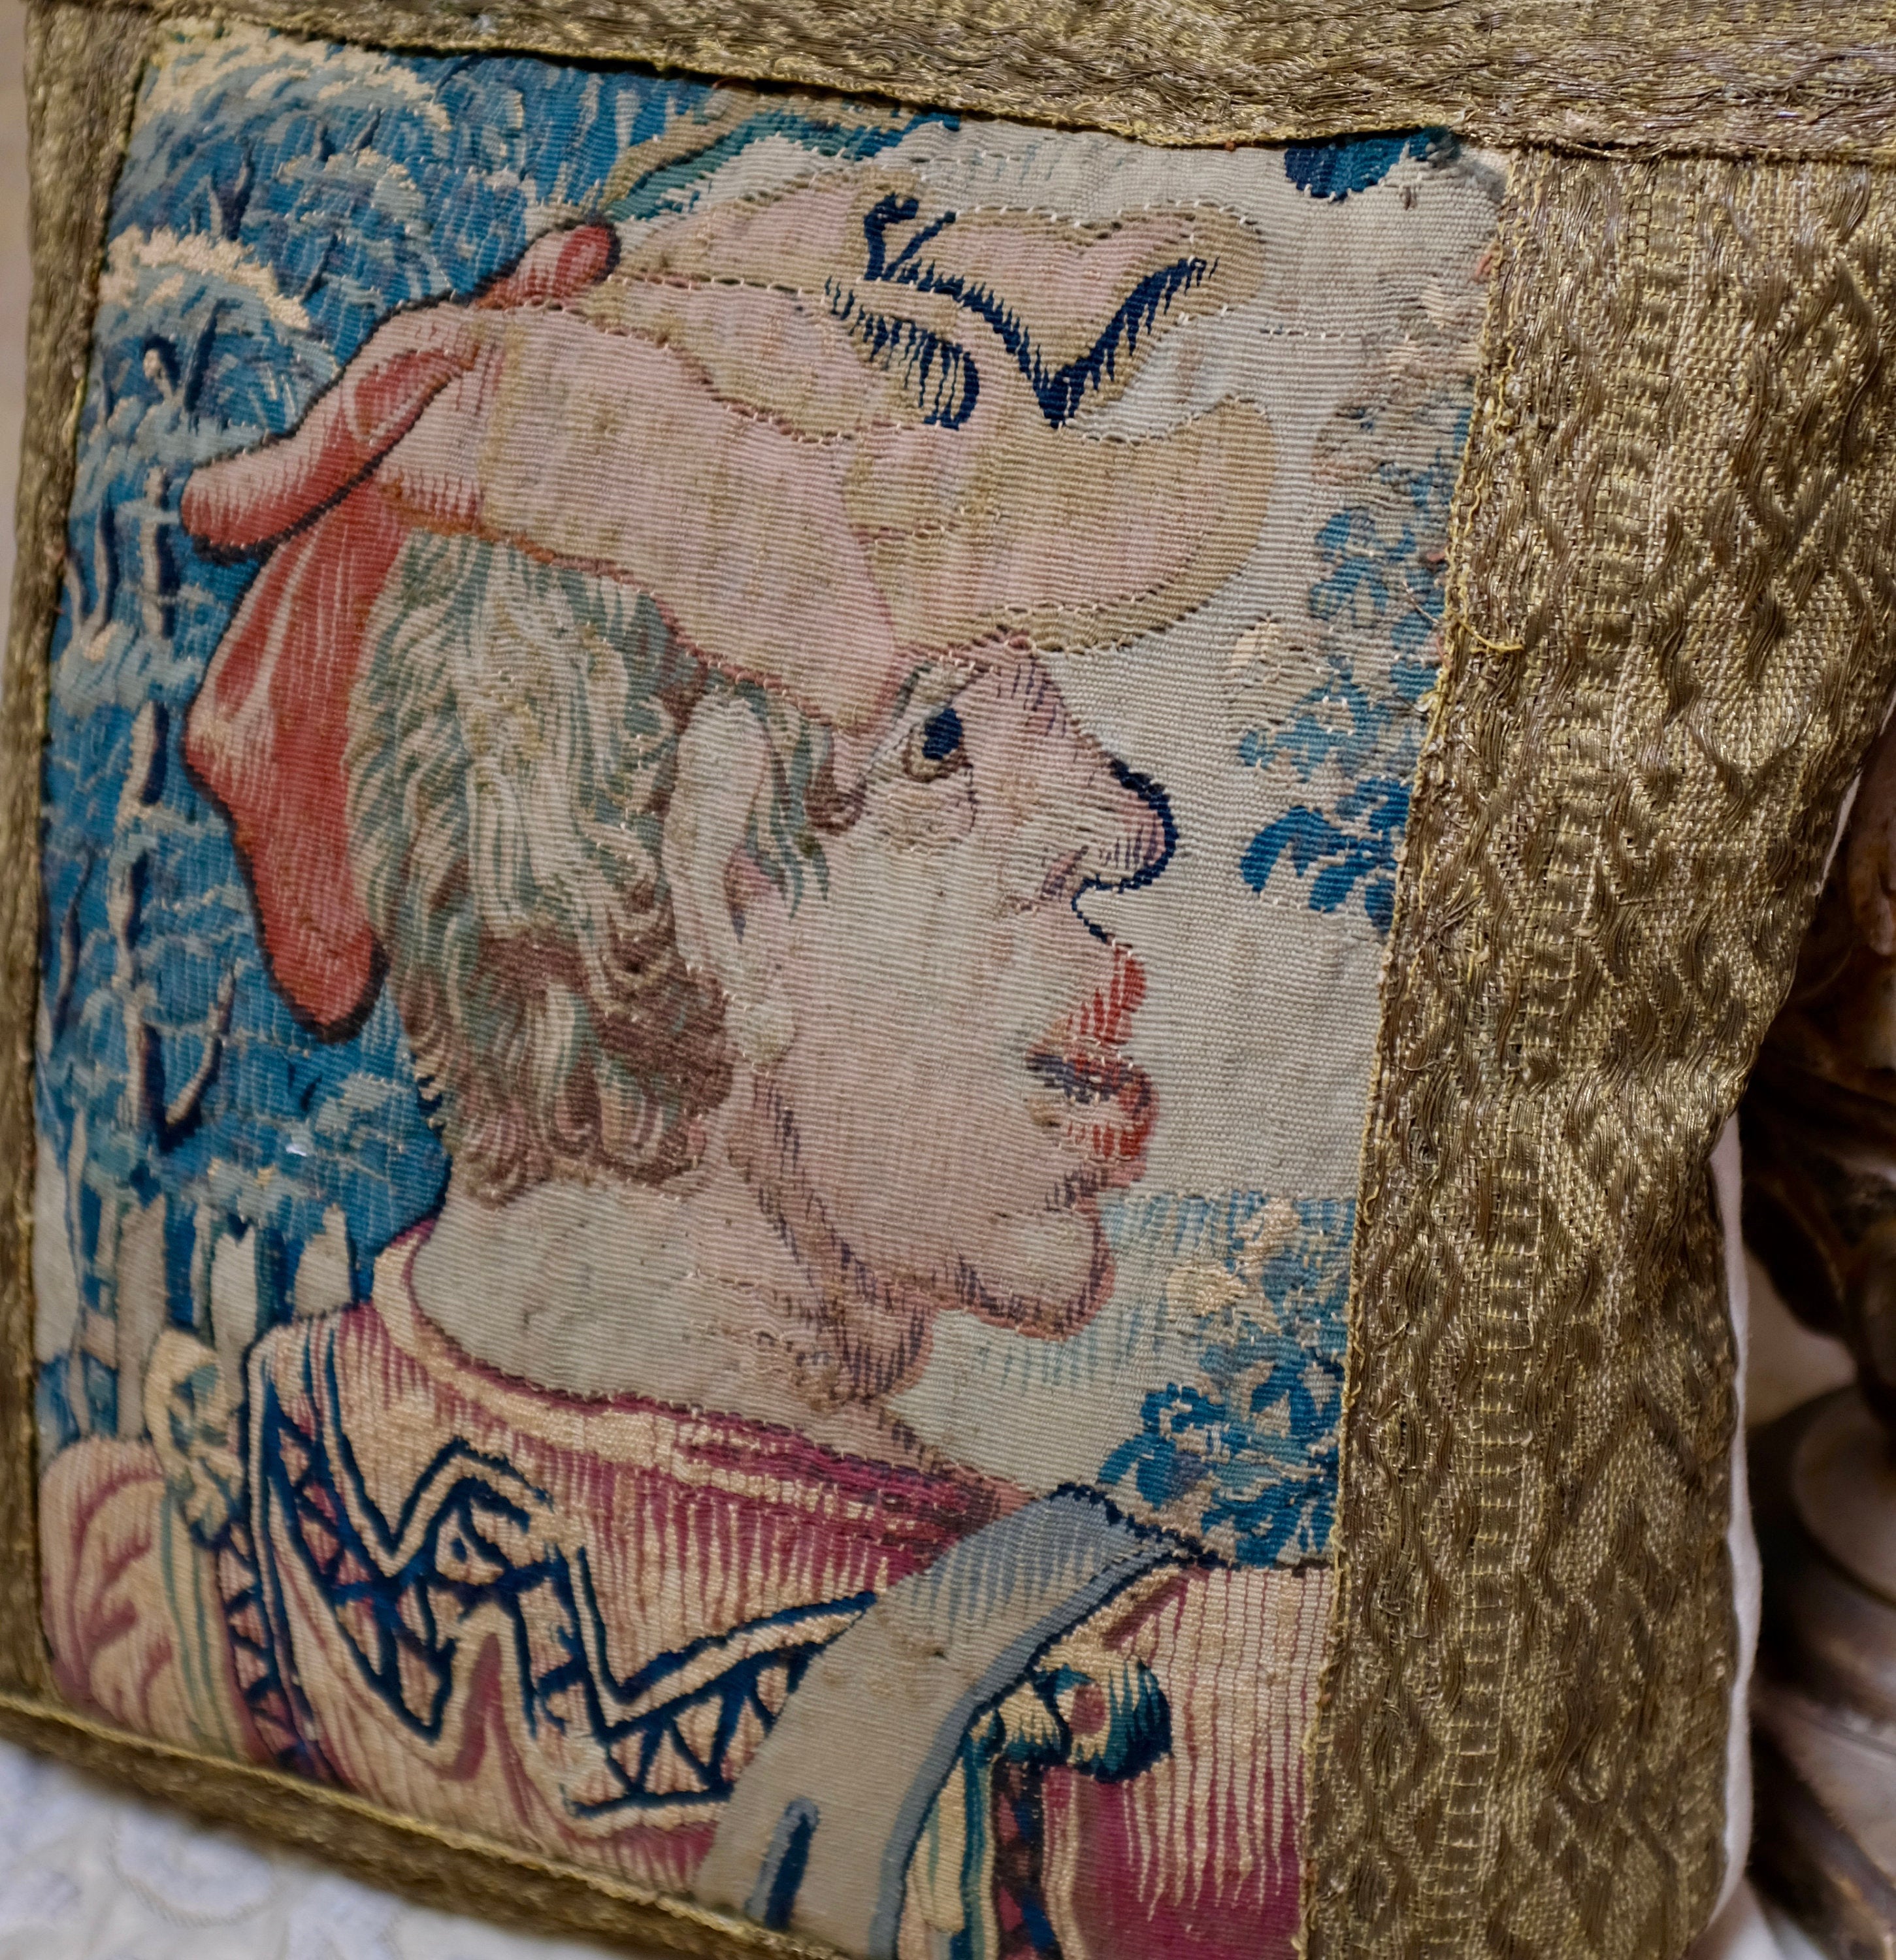 ON HOLD FOR SC    Antique Pillow Aubusson Tapestry  16th / 17th Century Flemish